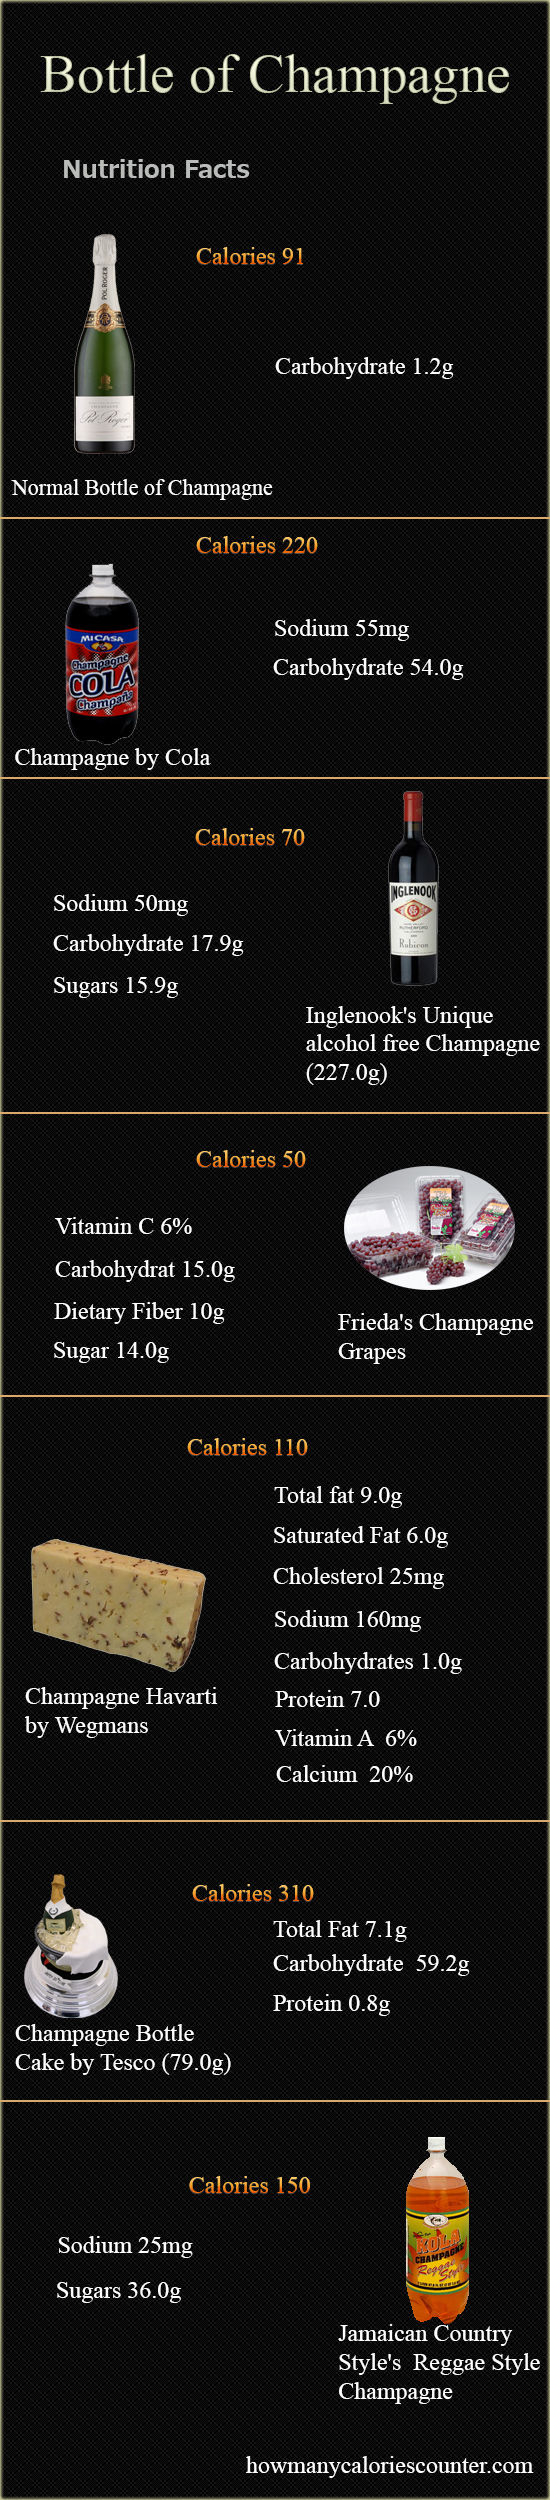 How Many Calories in a Bottle of Champagne - How Many Calories Counter